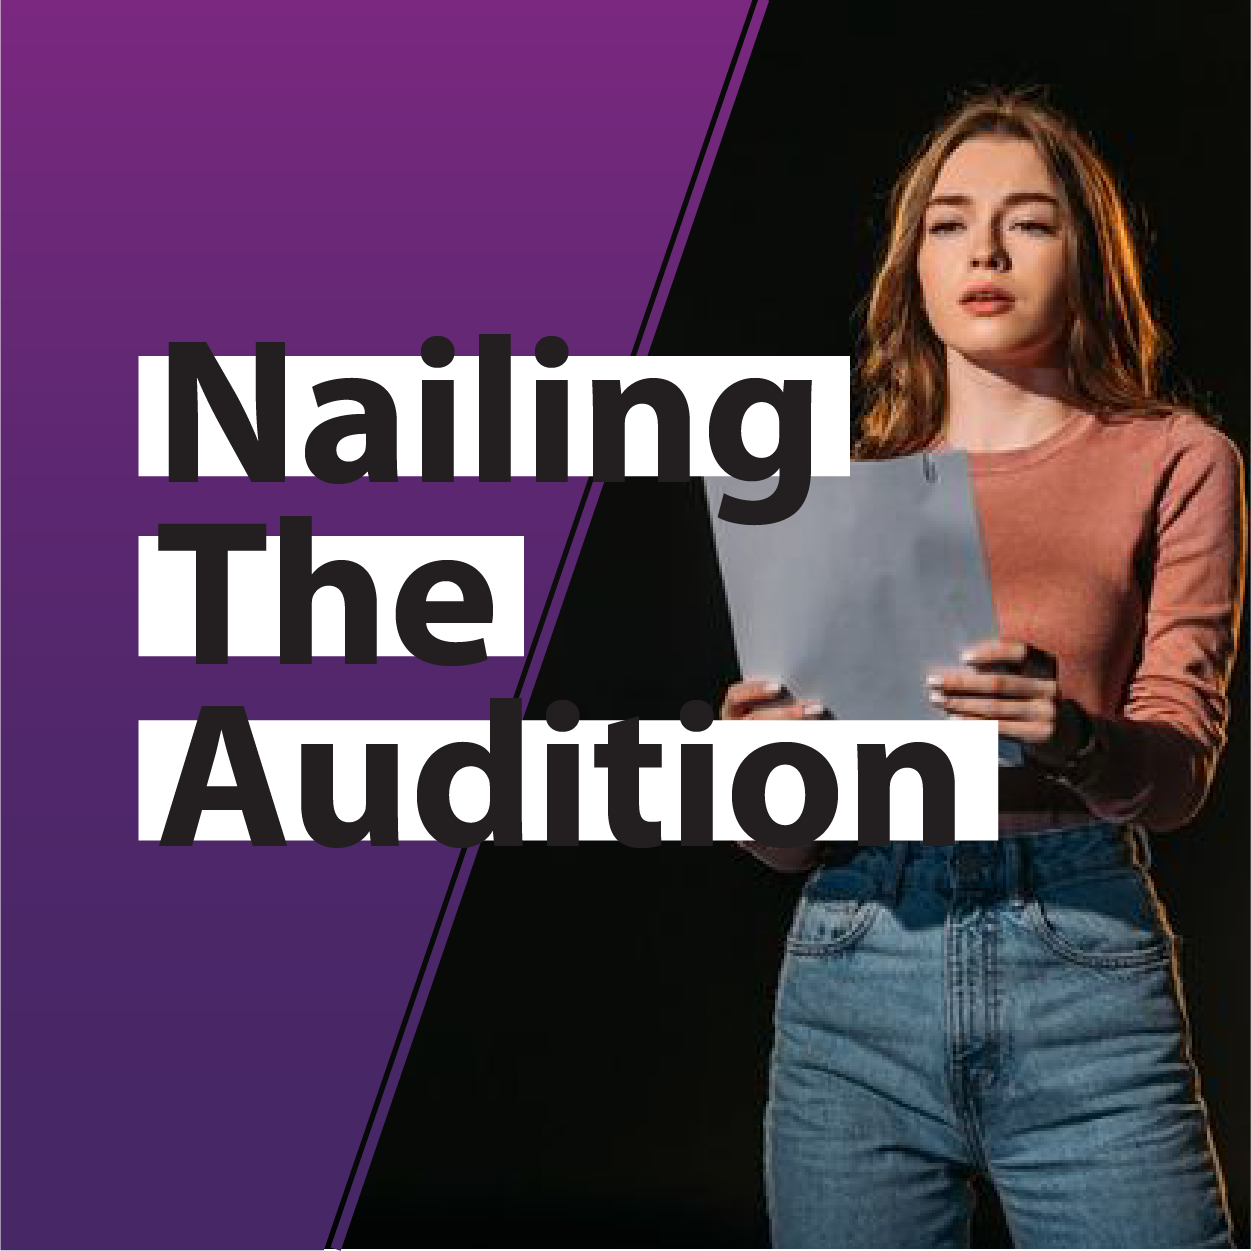 Nailing the Audition